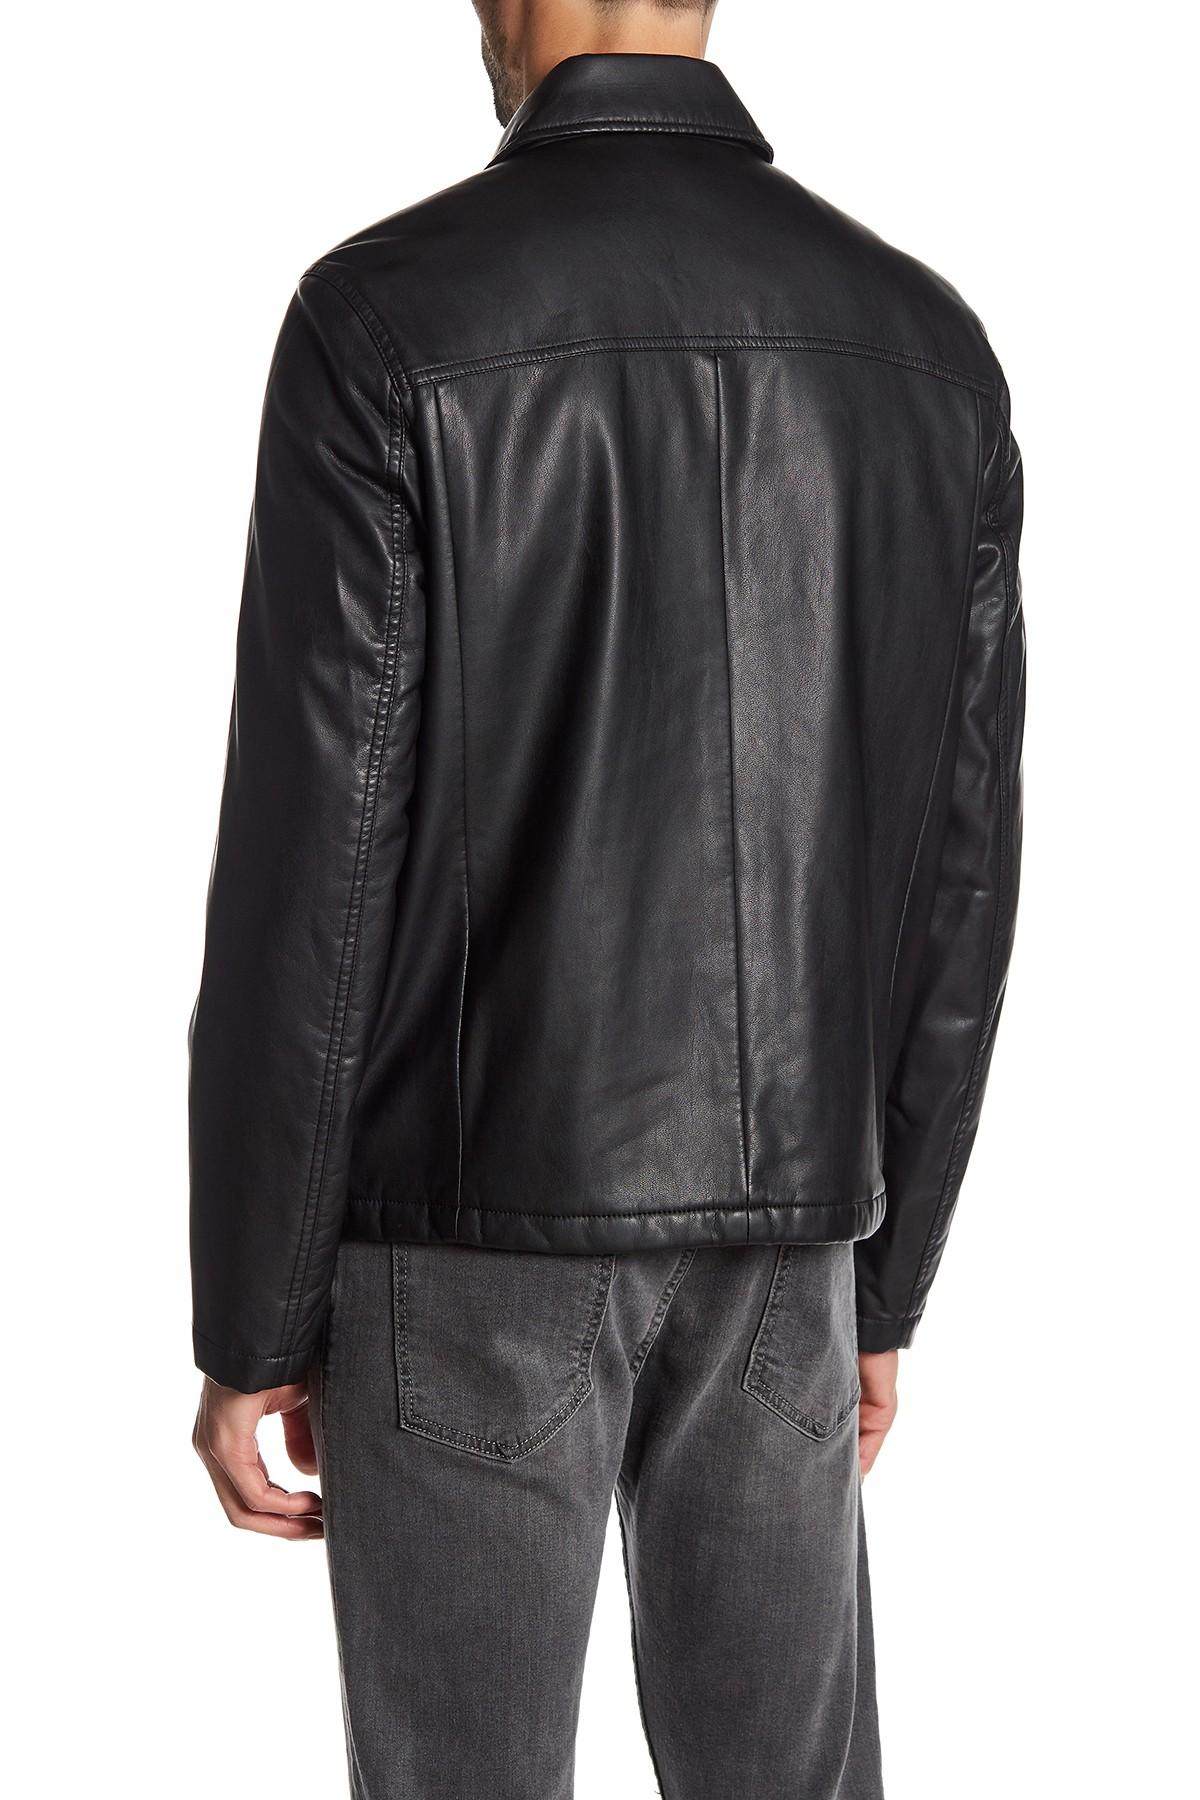 Kenneth cole Full Zip Faux Leather Jacket in Black for Men | Lyst